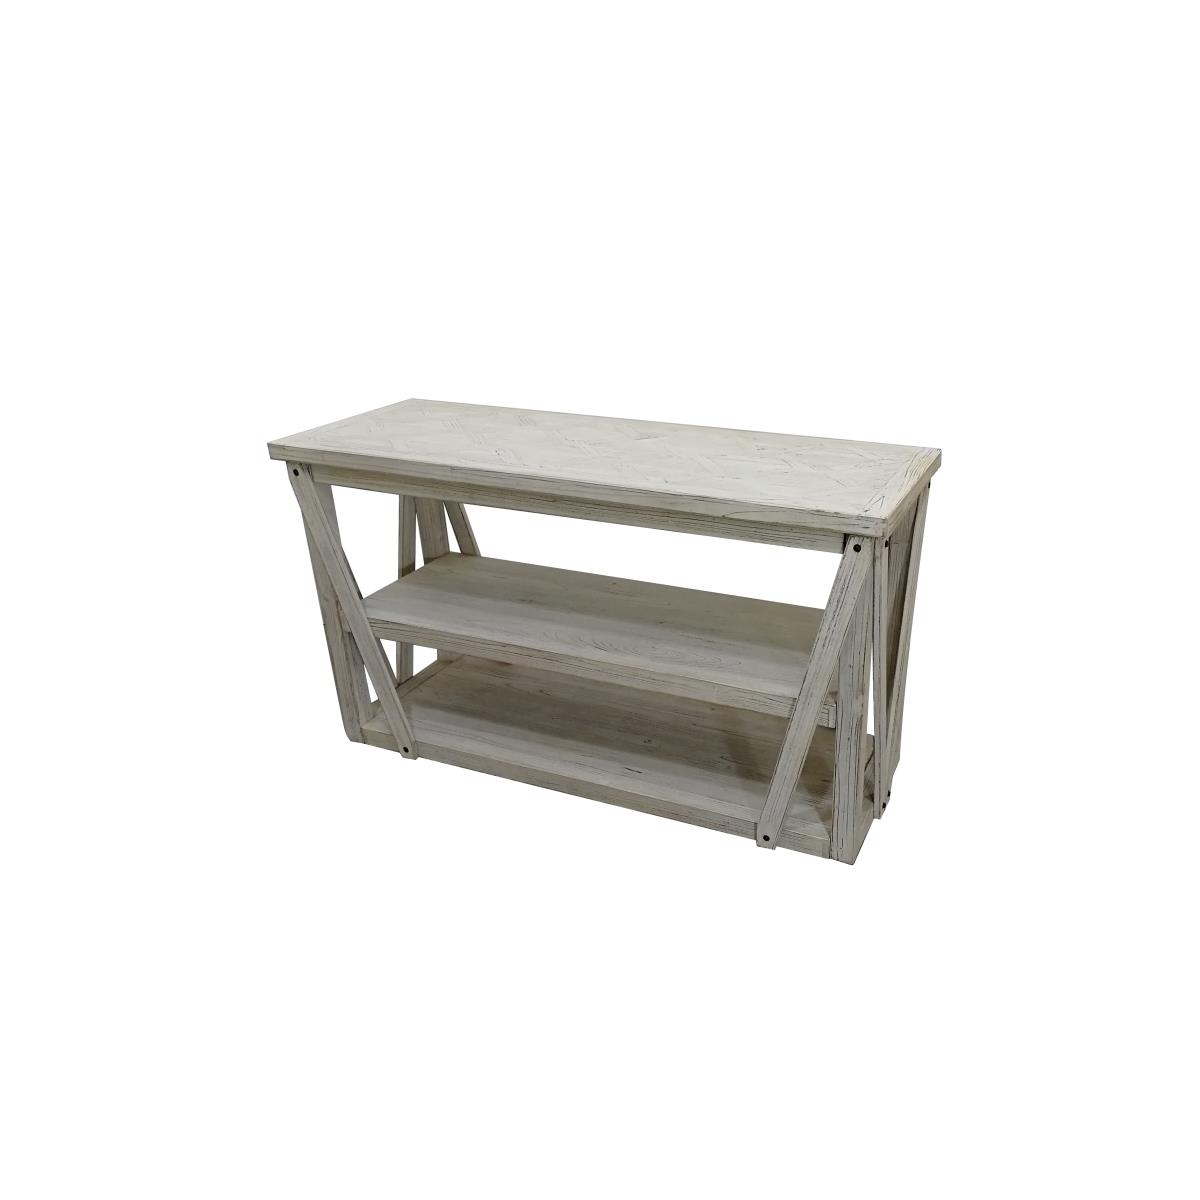 5940-lr-400 Santee Console Table, Whitewashed Pine - 18 X 30 X 52 In.